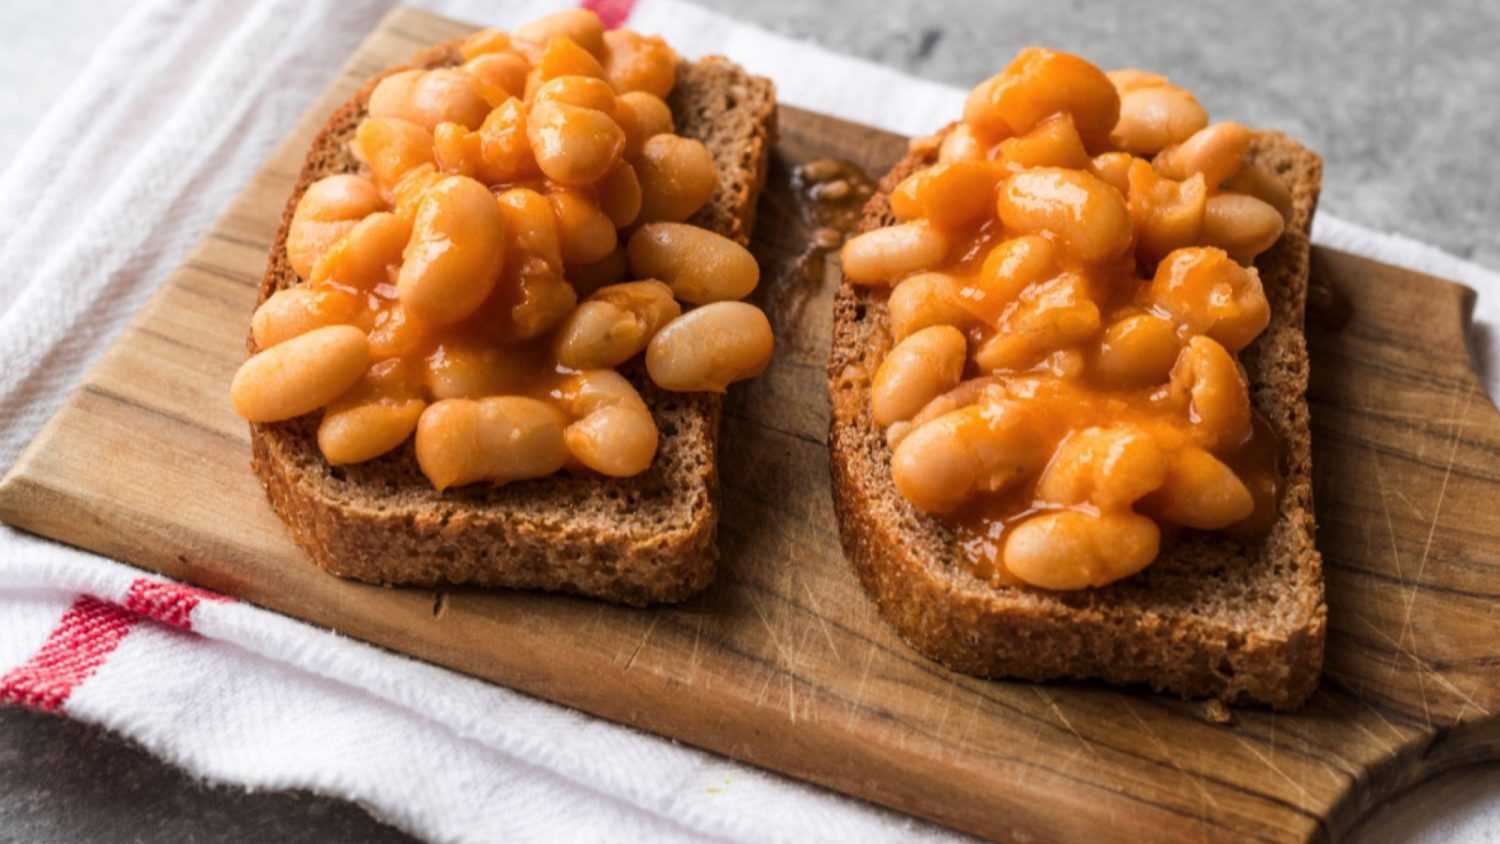 Baked Beans with toast bread